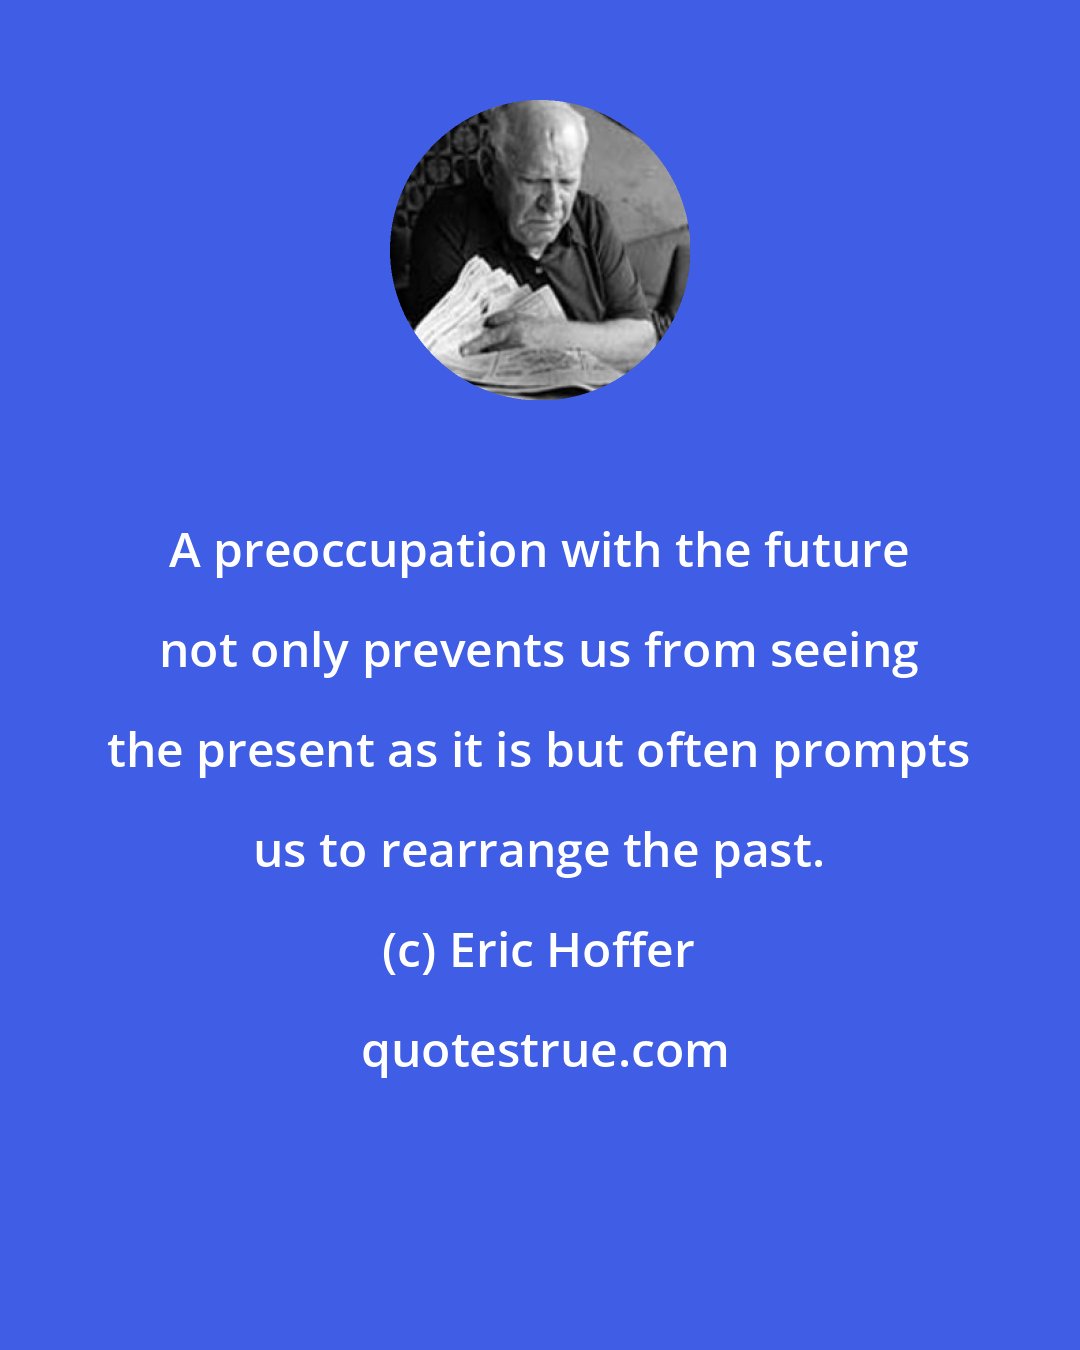 Eric Hoffer: A preoccupation with the future not only prevents us from seeing the present as it is but often prompts us to rearrange the past.